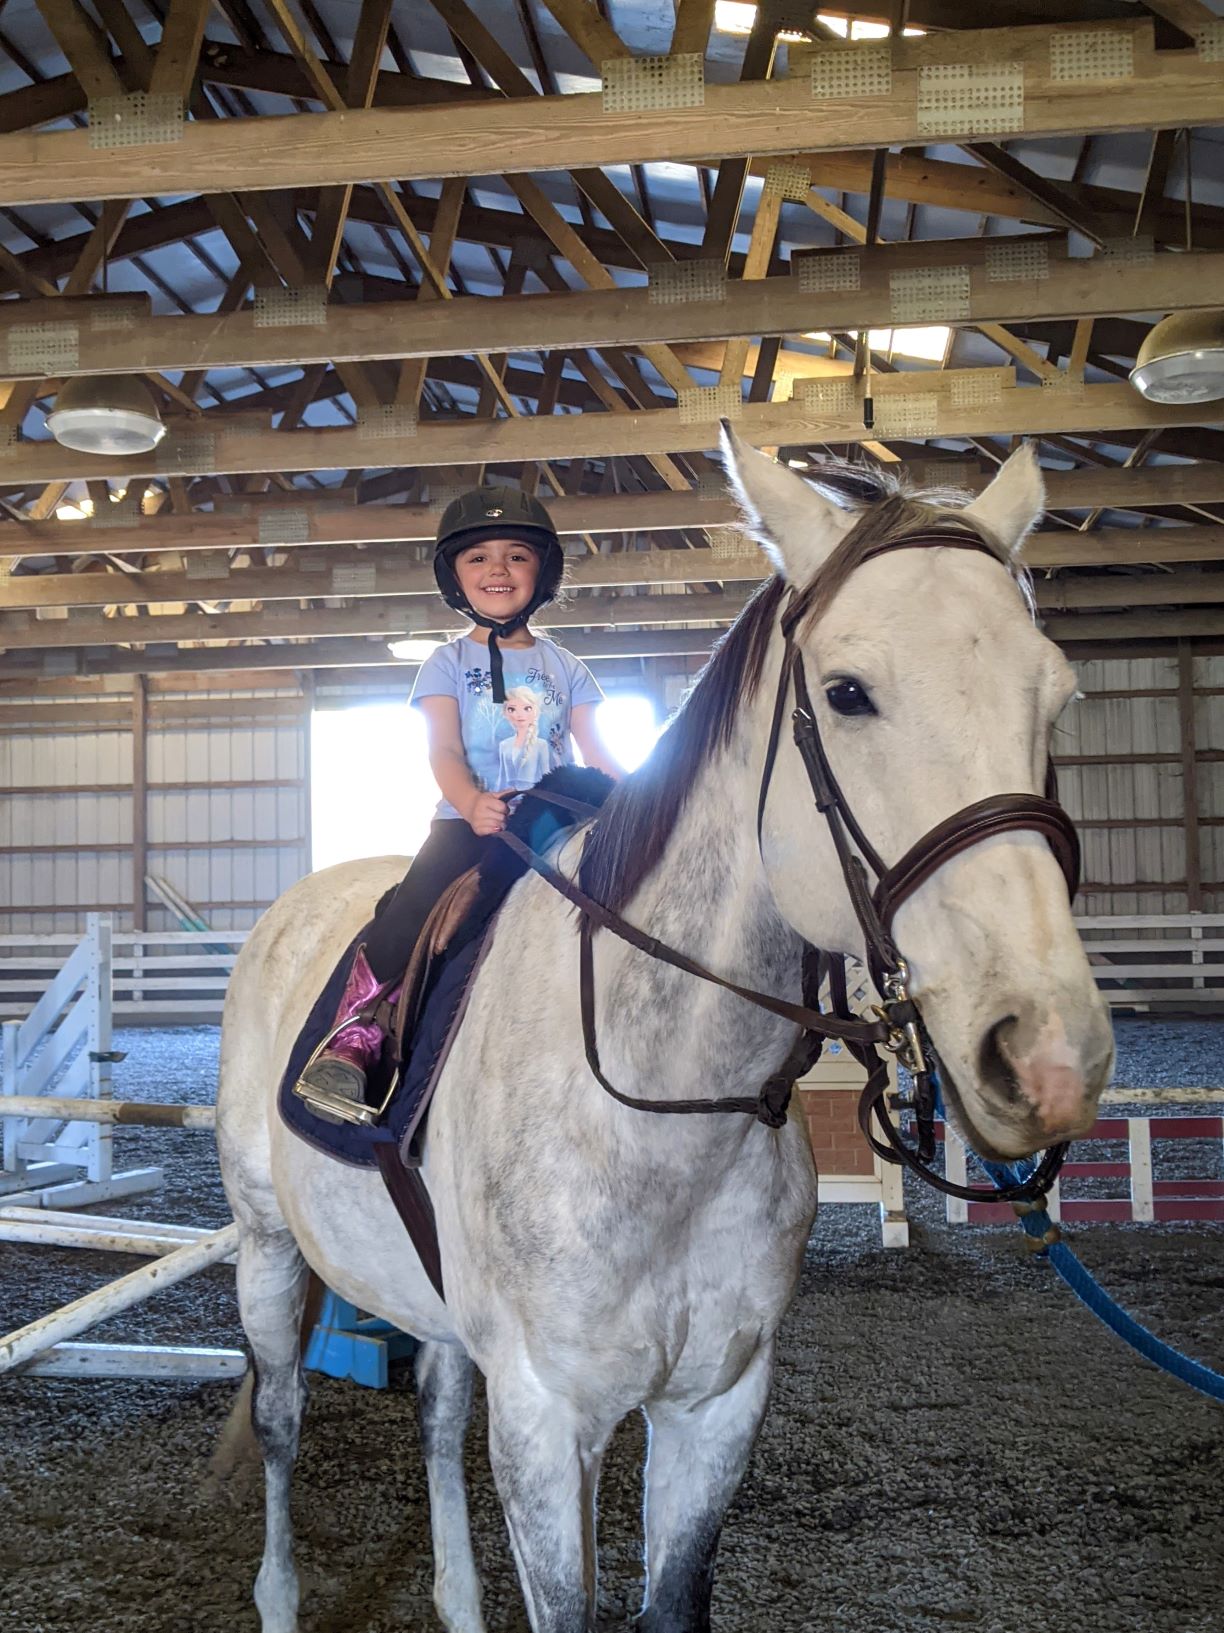 horseback riding lessons, riding lessons, first riding lesson, what to expect at your first riding lesson, learning to ride, horseback riding